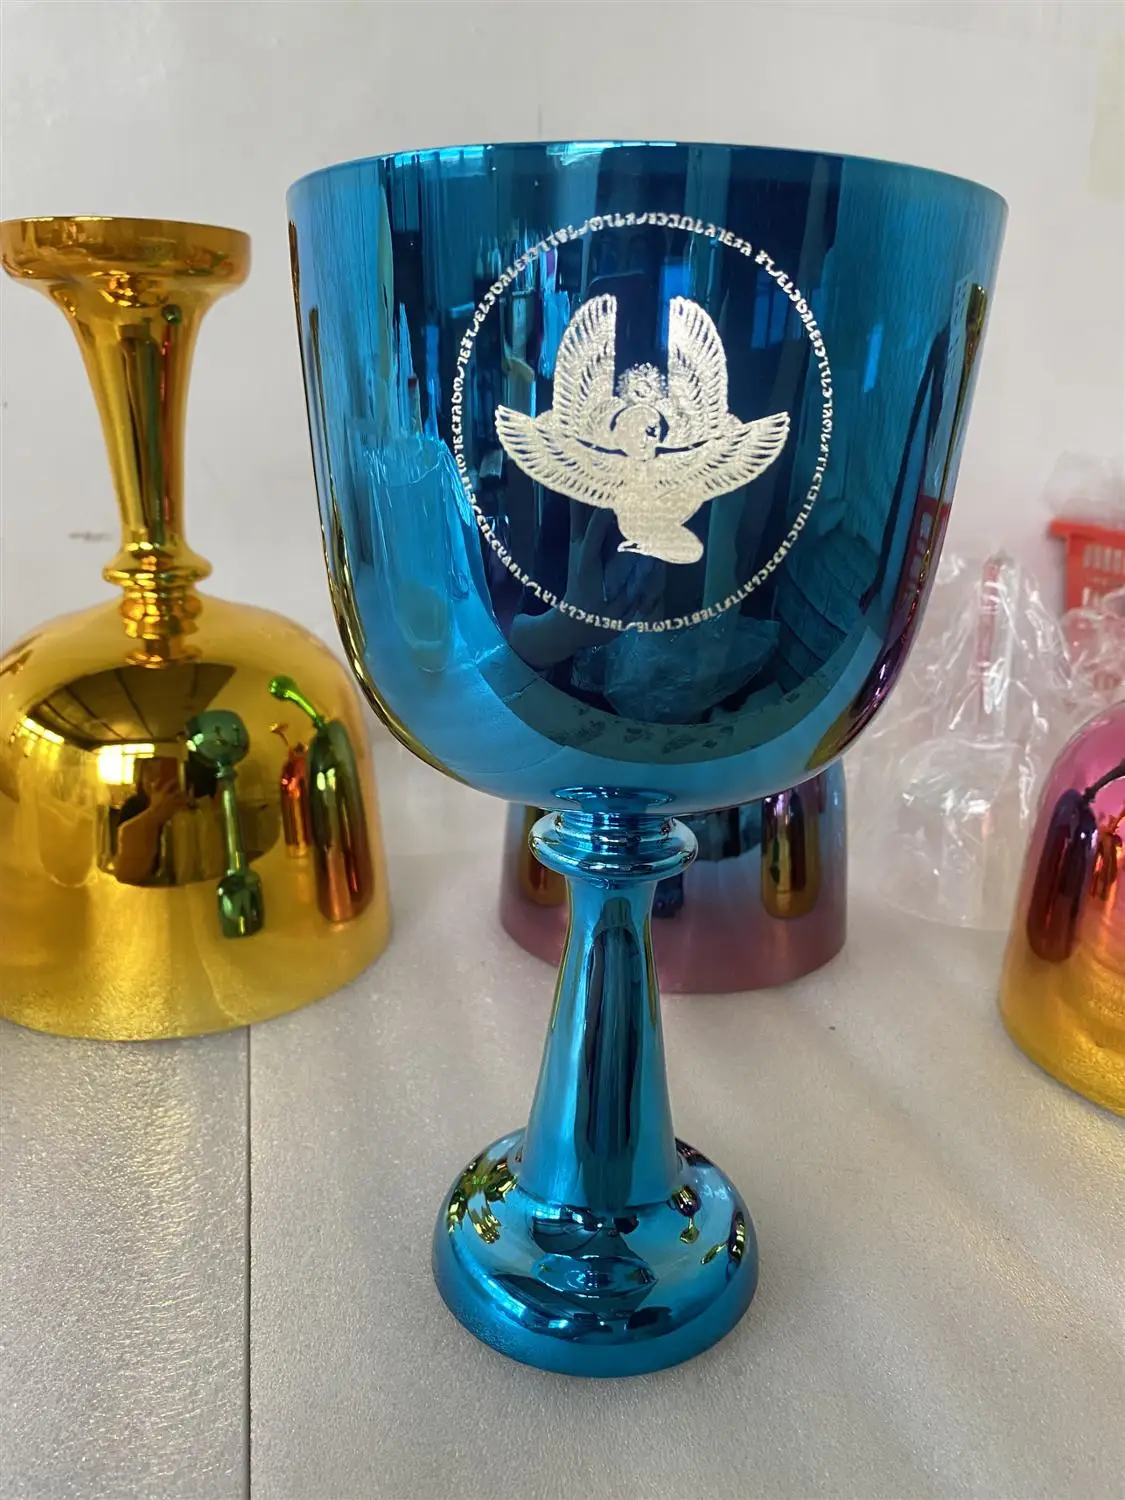 

4th octave crystal singing chalice shinny blue color 432HZ Perfect pitch "G#" note with isis engravings for sound healing